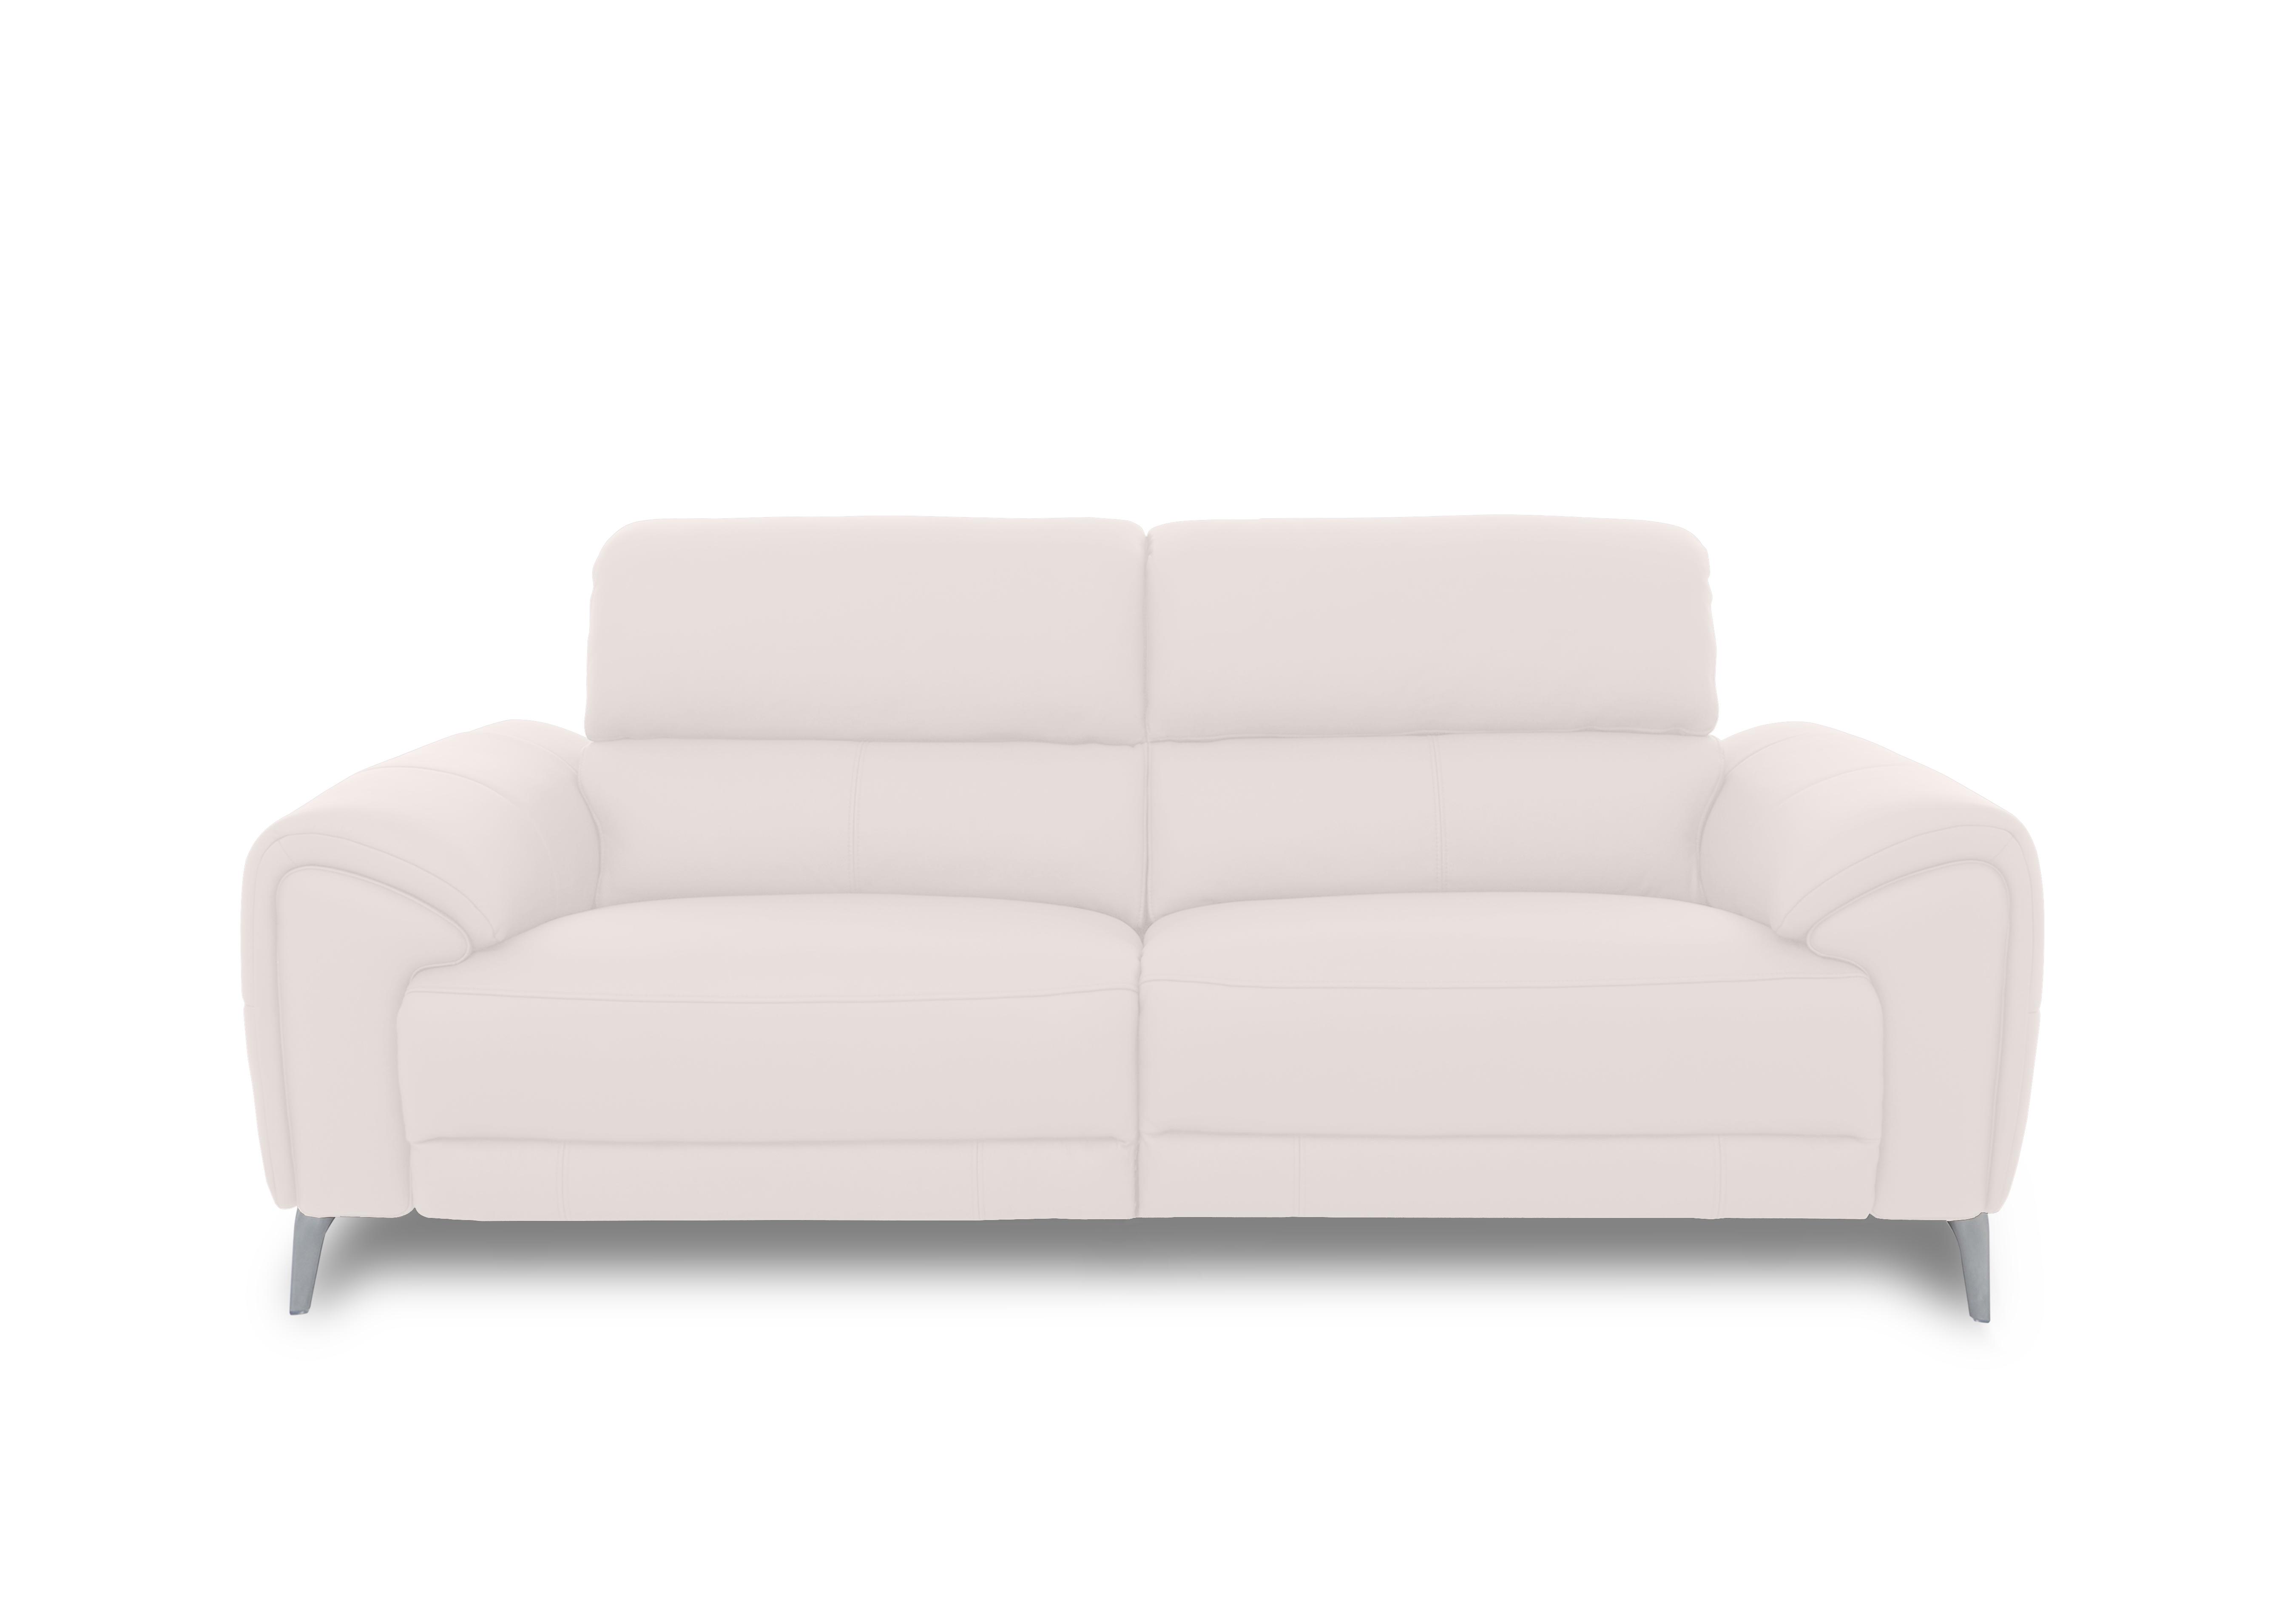 Vino Leather 3 Seater Sofa in Cat-40/13 Cotton on Furniture Village